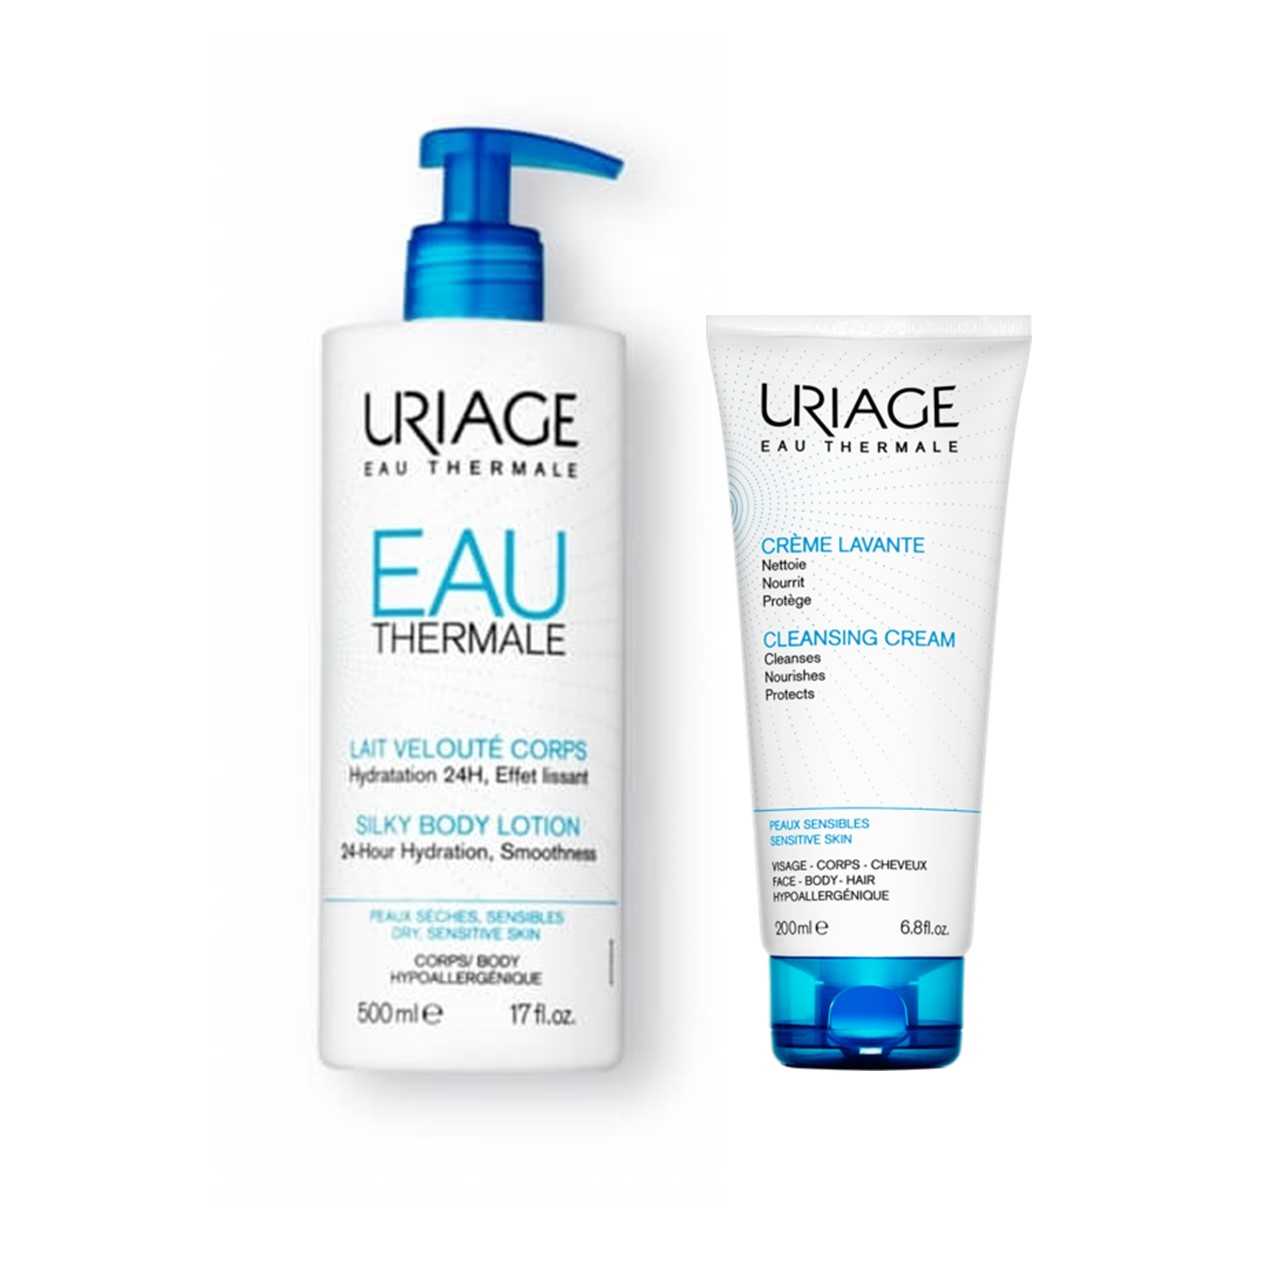 Uriage Eau Thermale Silky Body Lotion 500ml + Cleansing Cream 200ml